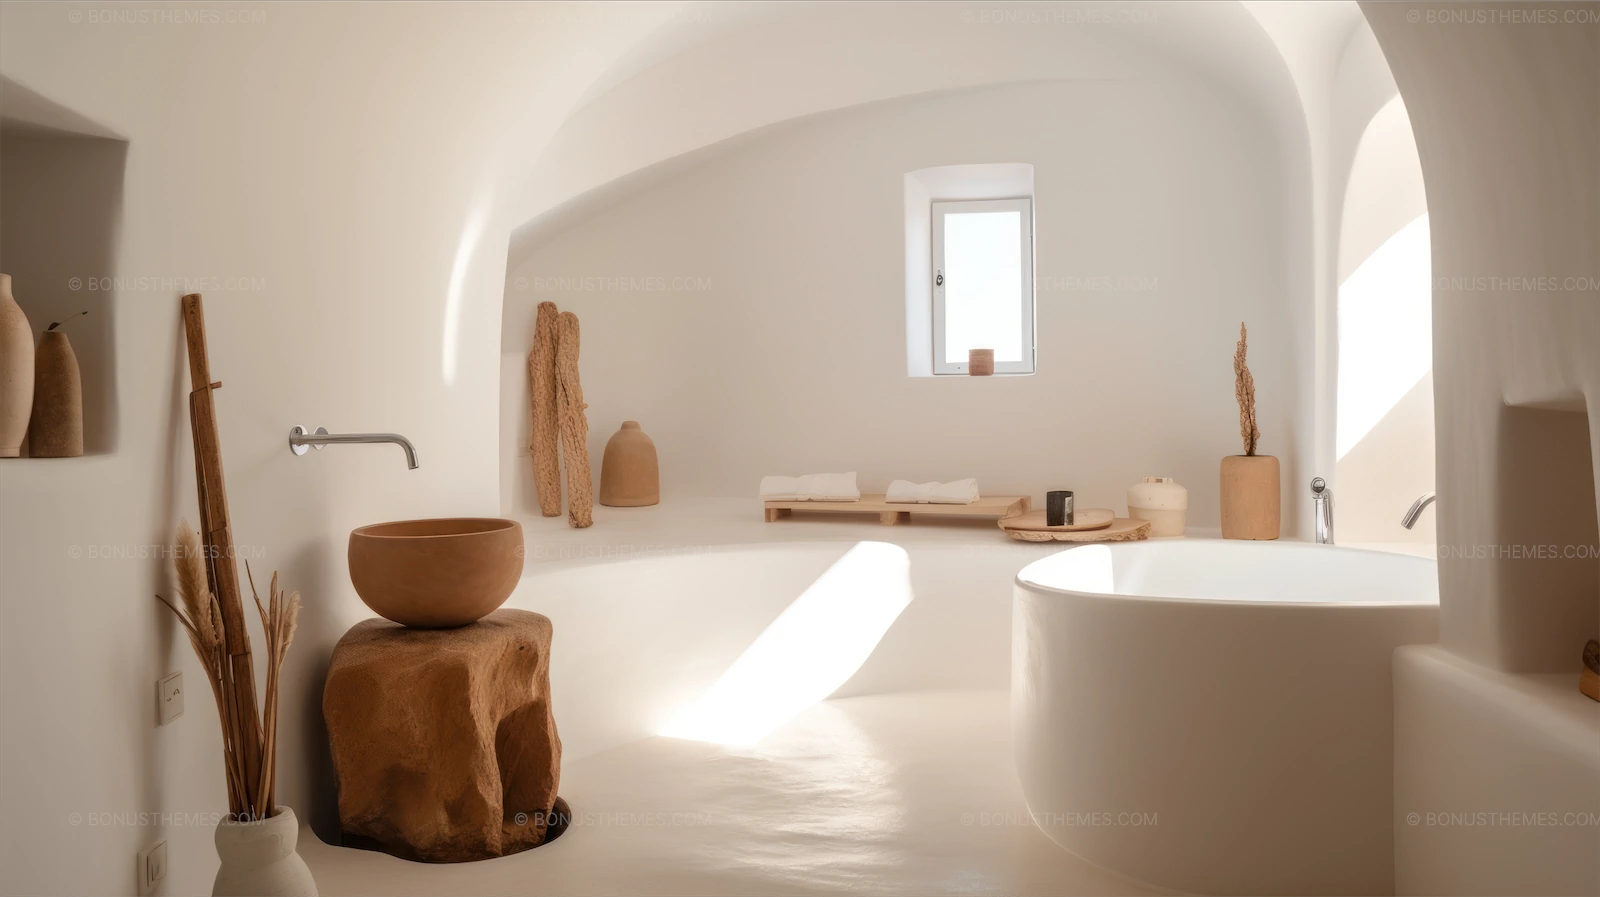 Minimalistic cycladic style bathroom with curved white walls